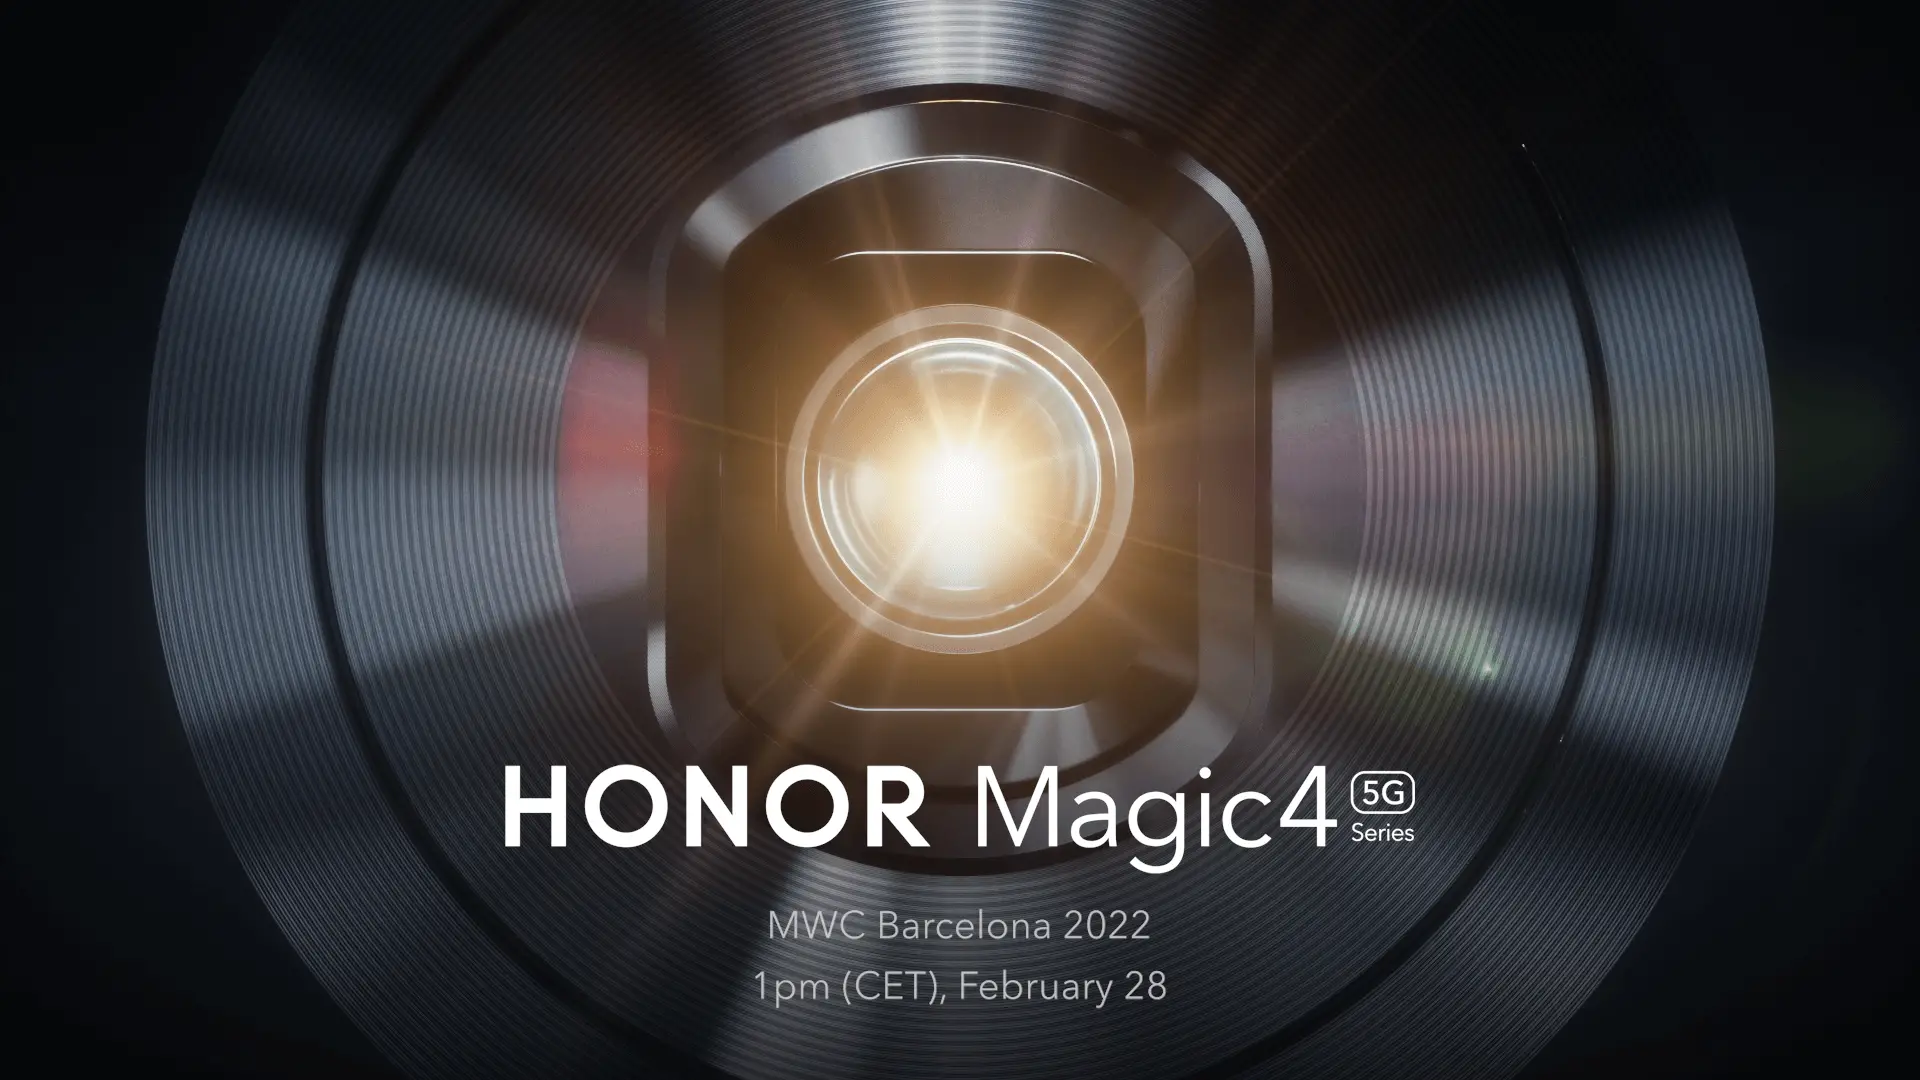 Honor Magic 4 series set to be disclosed on February 28 during MWC 2022